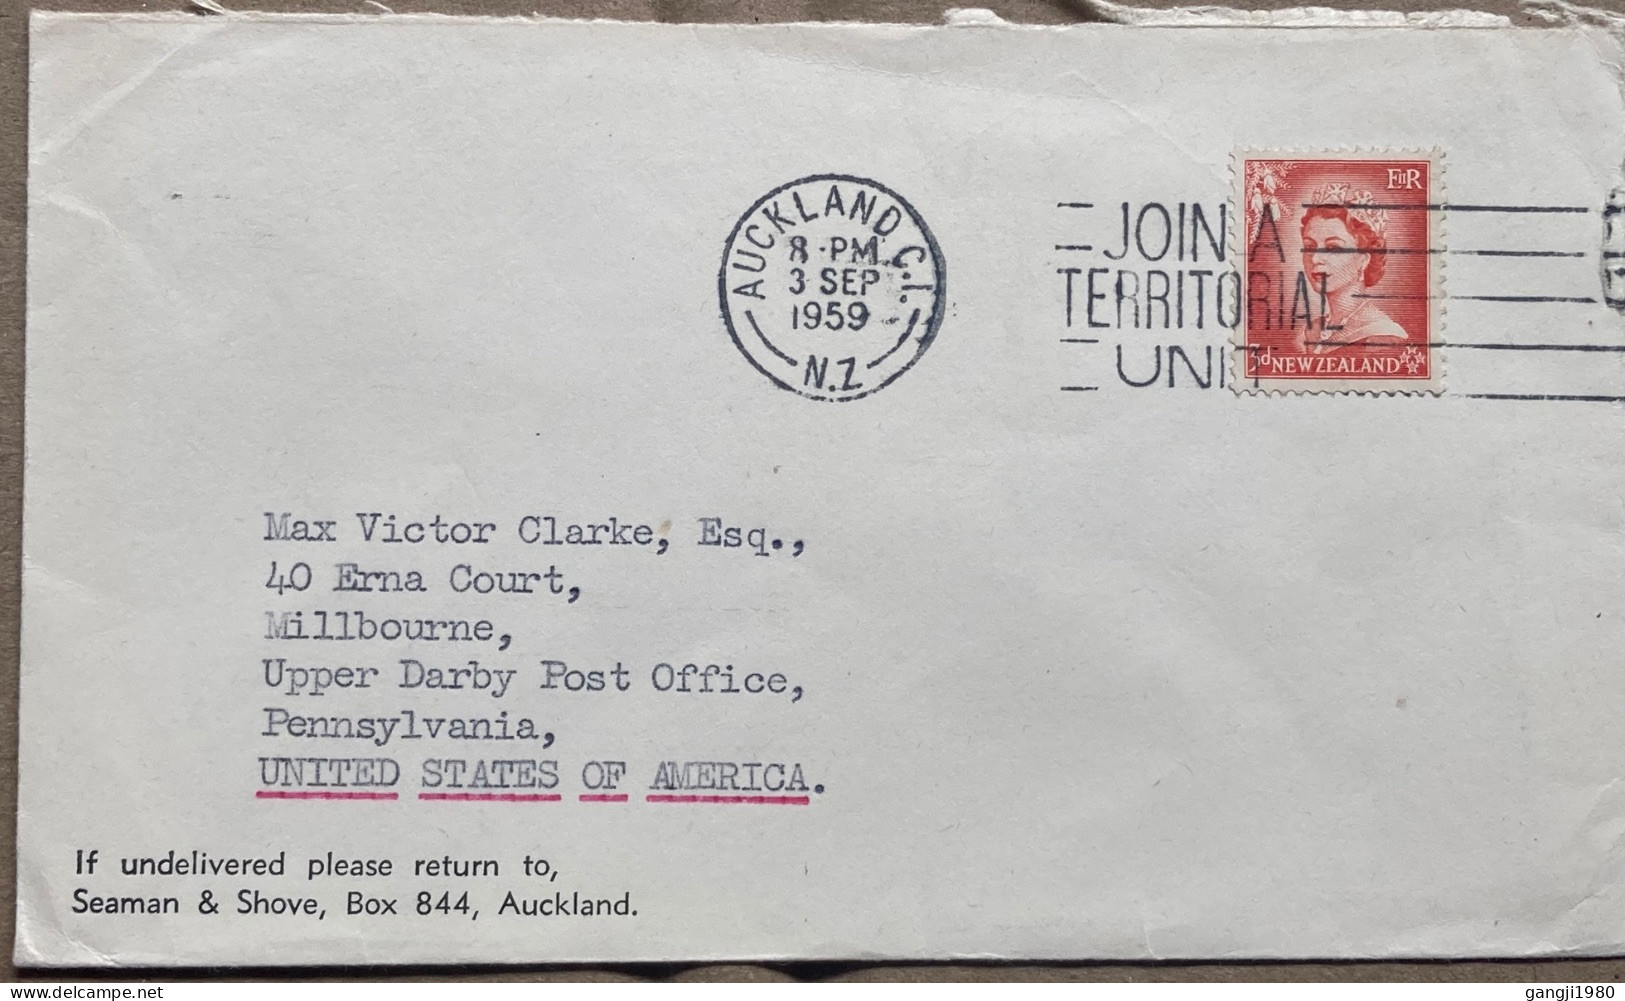 NEW ZEALAND 1959, COVER USED TO USA, FIRM SEAMAN & SHOVE, AUCKLAND CITY SLOGAN CANCEL, JOIN A TERRITORIAL UNIT, QUEEN ST - Cartas & Documentos